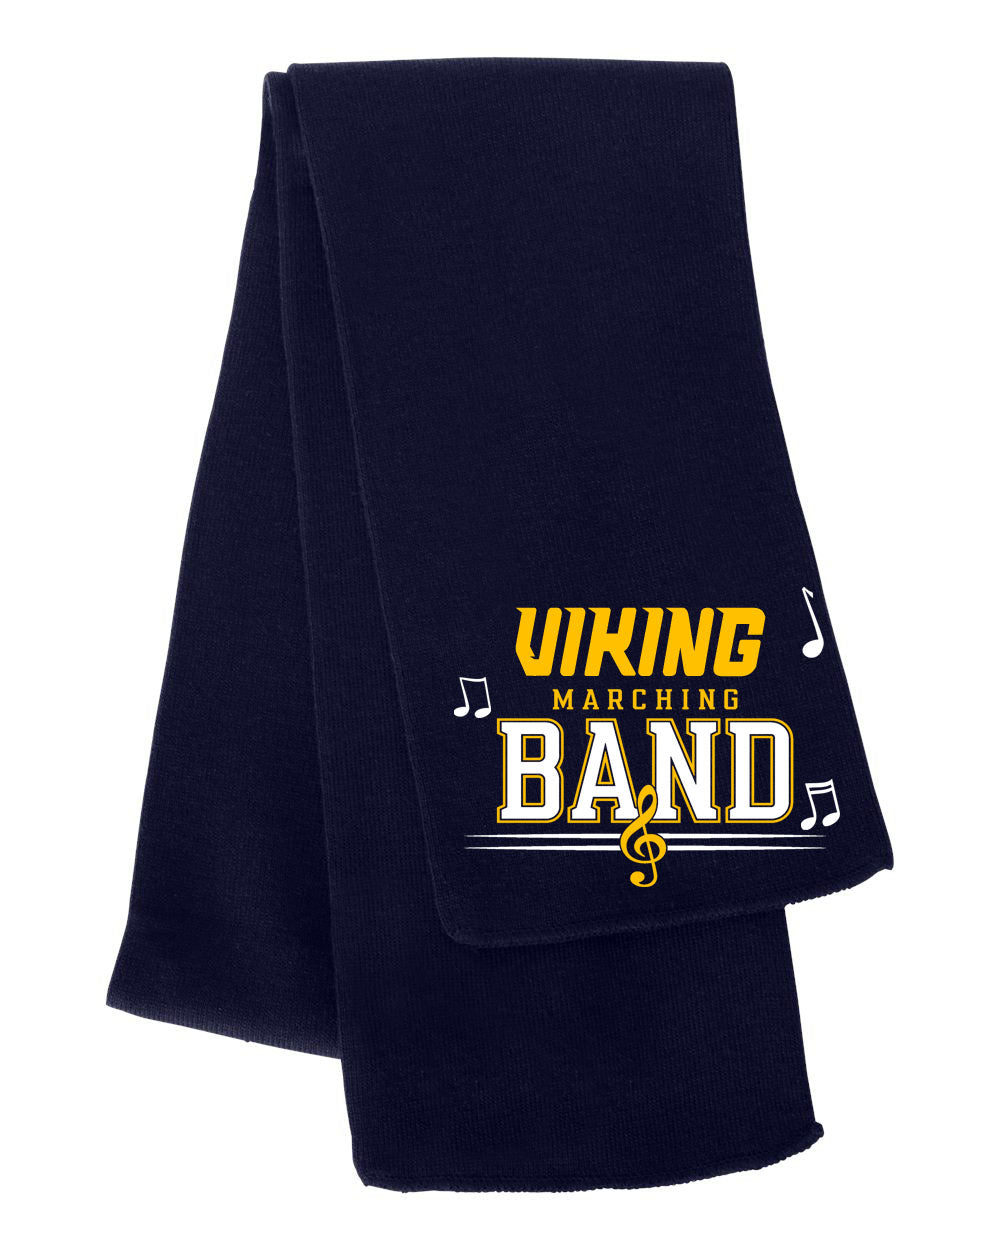 Vernon Marching Band design 5 Scarf